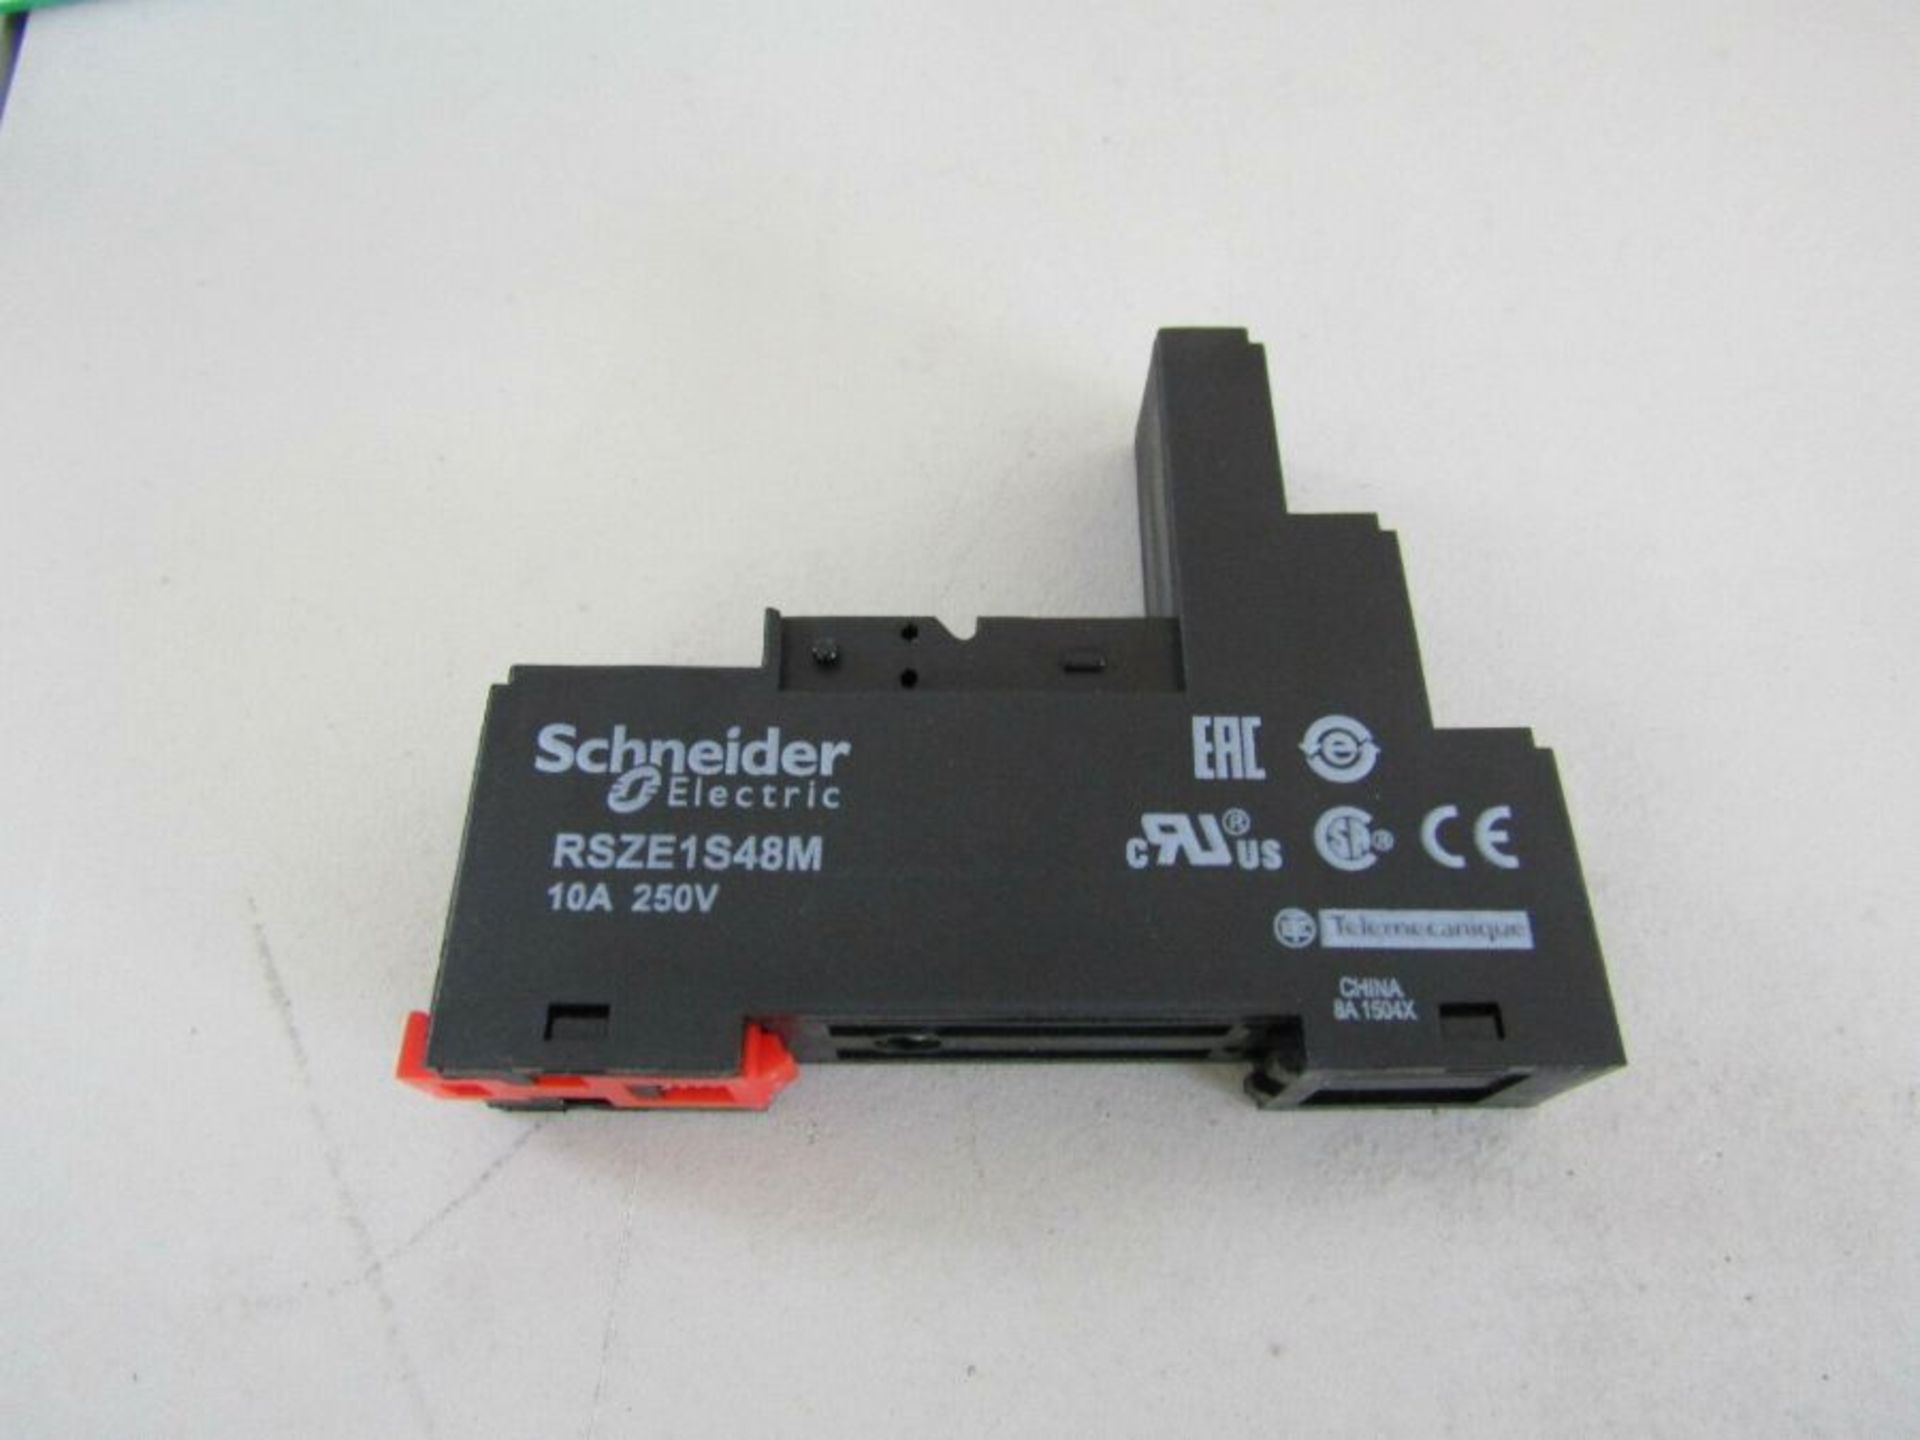 200 x SCHNEIDER RSZE1S48M Relay Socket for RSB Series - (20 boxes of 10) S2 - 8497667 - Image 2 of 3